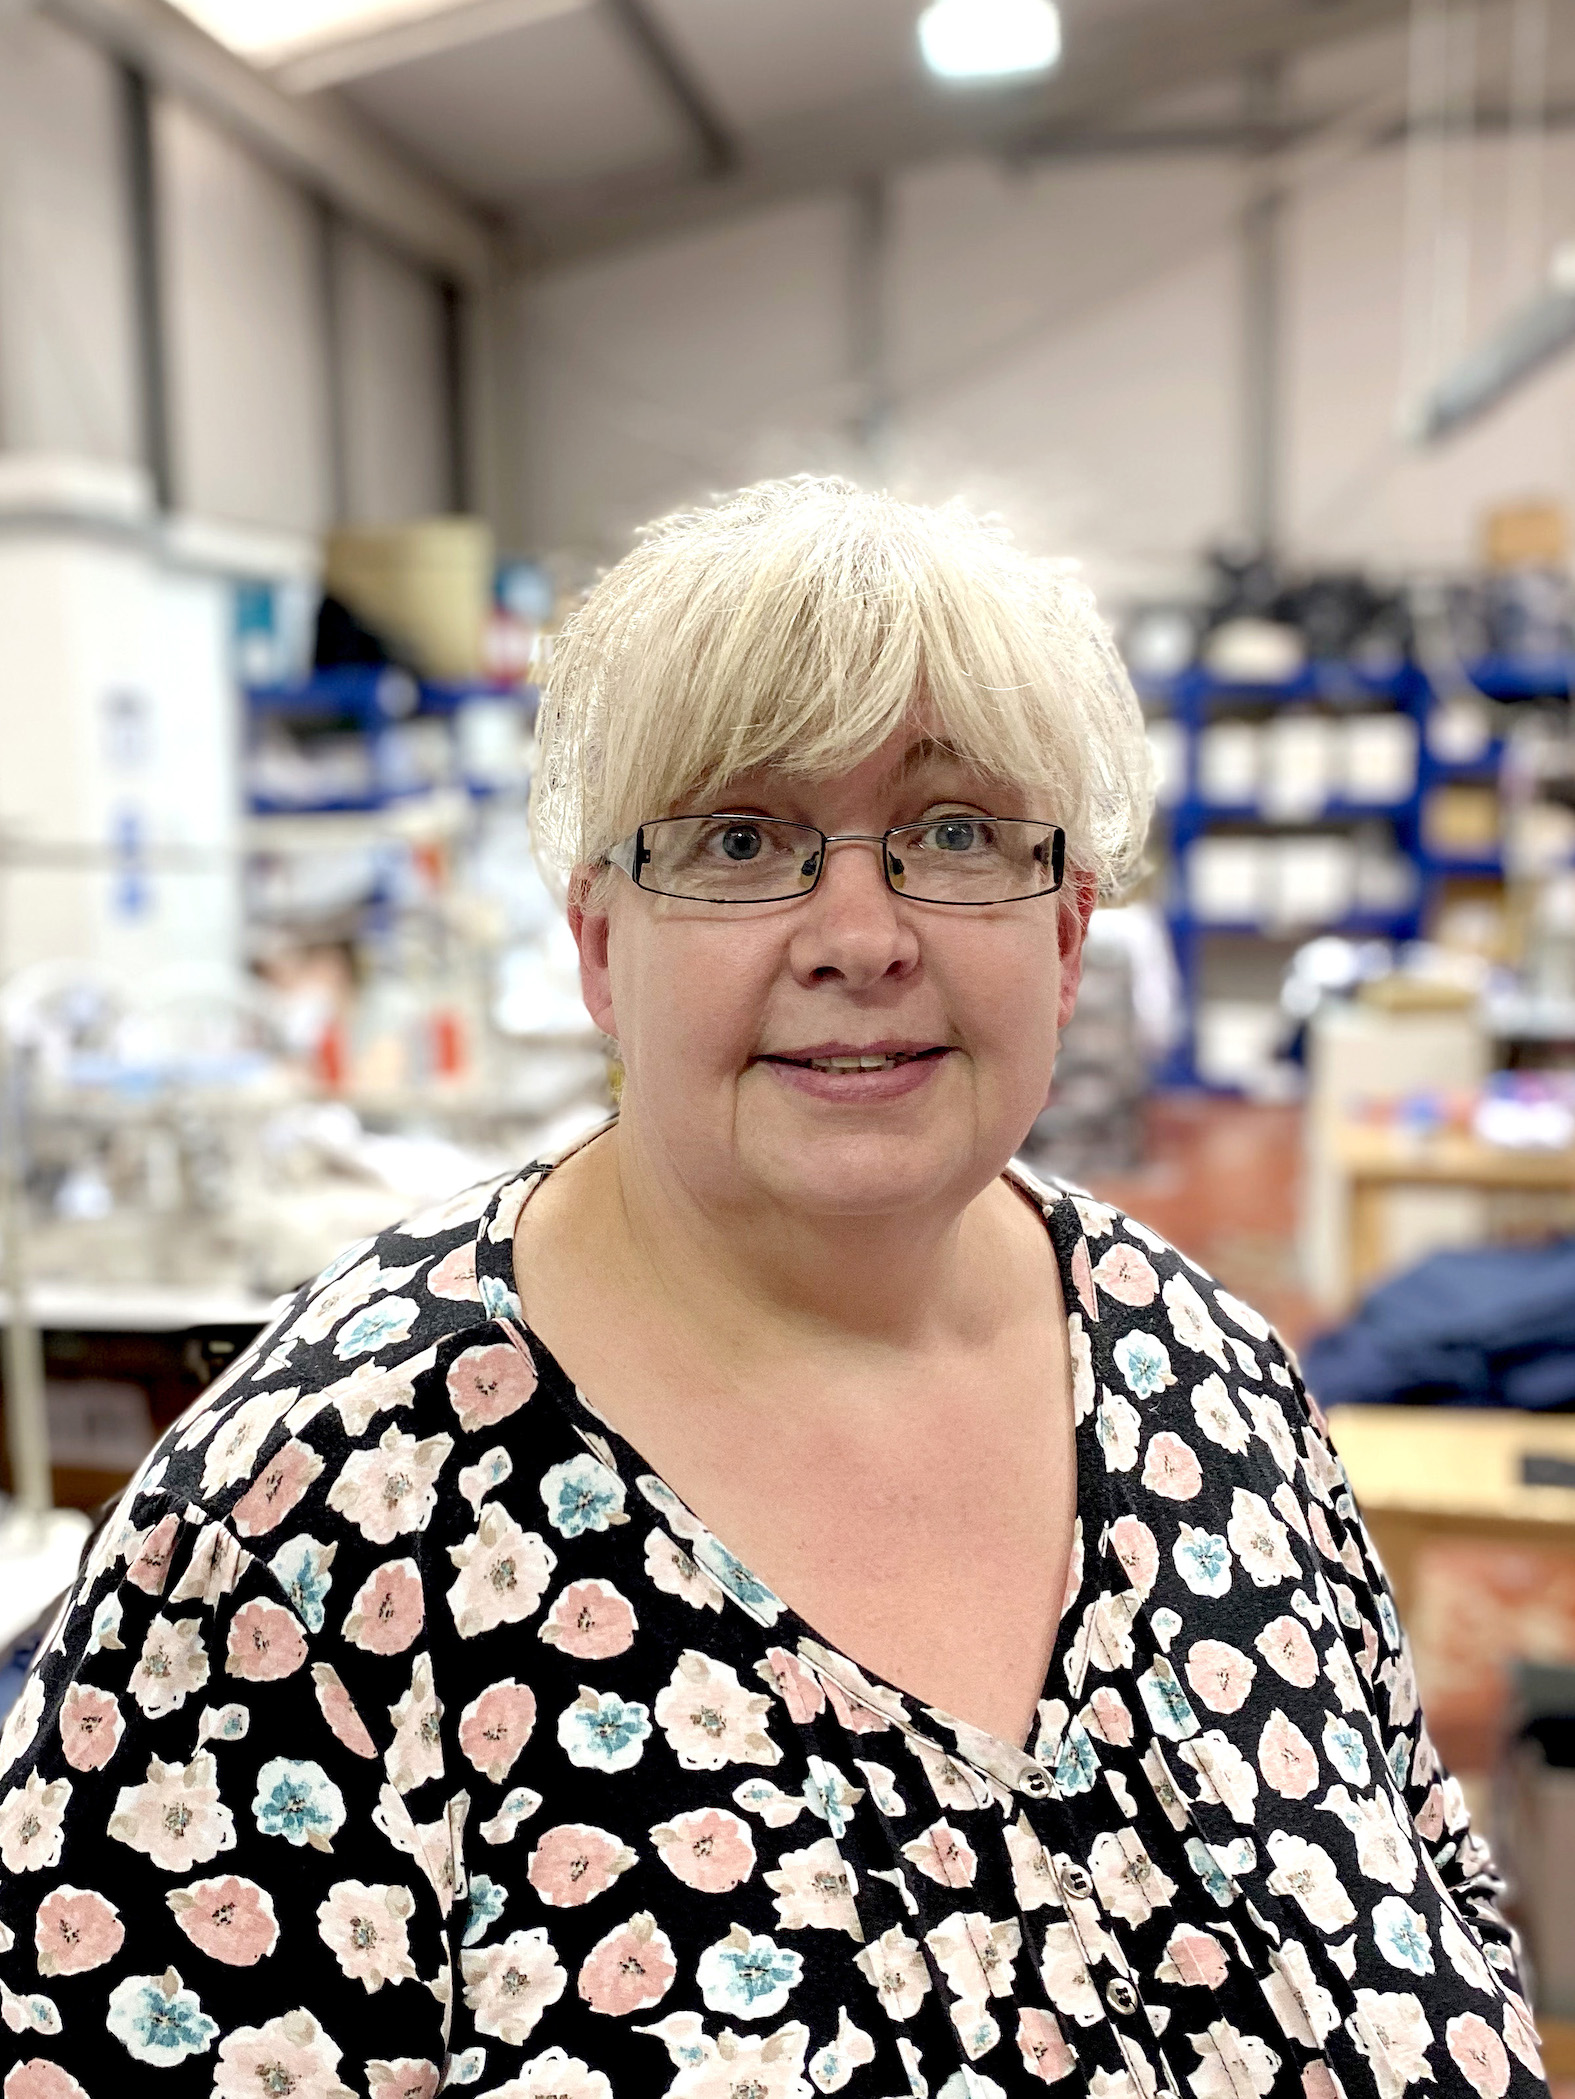 Nicola our fantastic sewing department supervisor